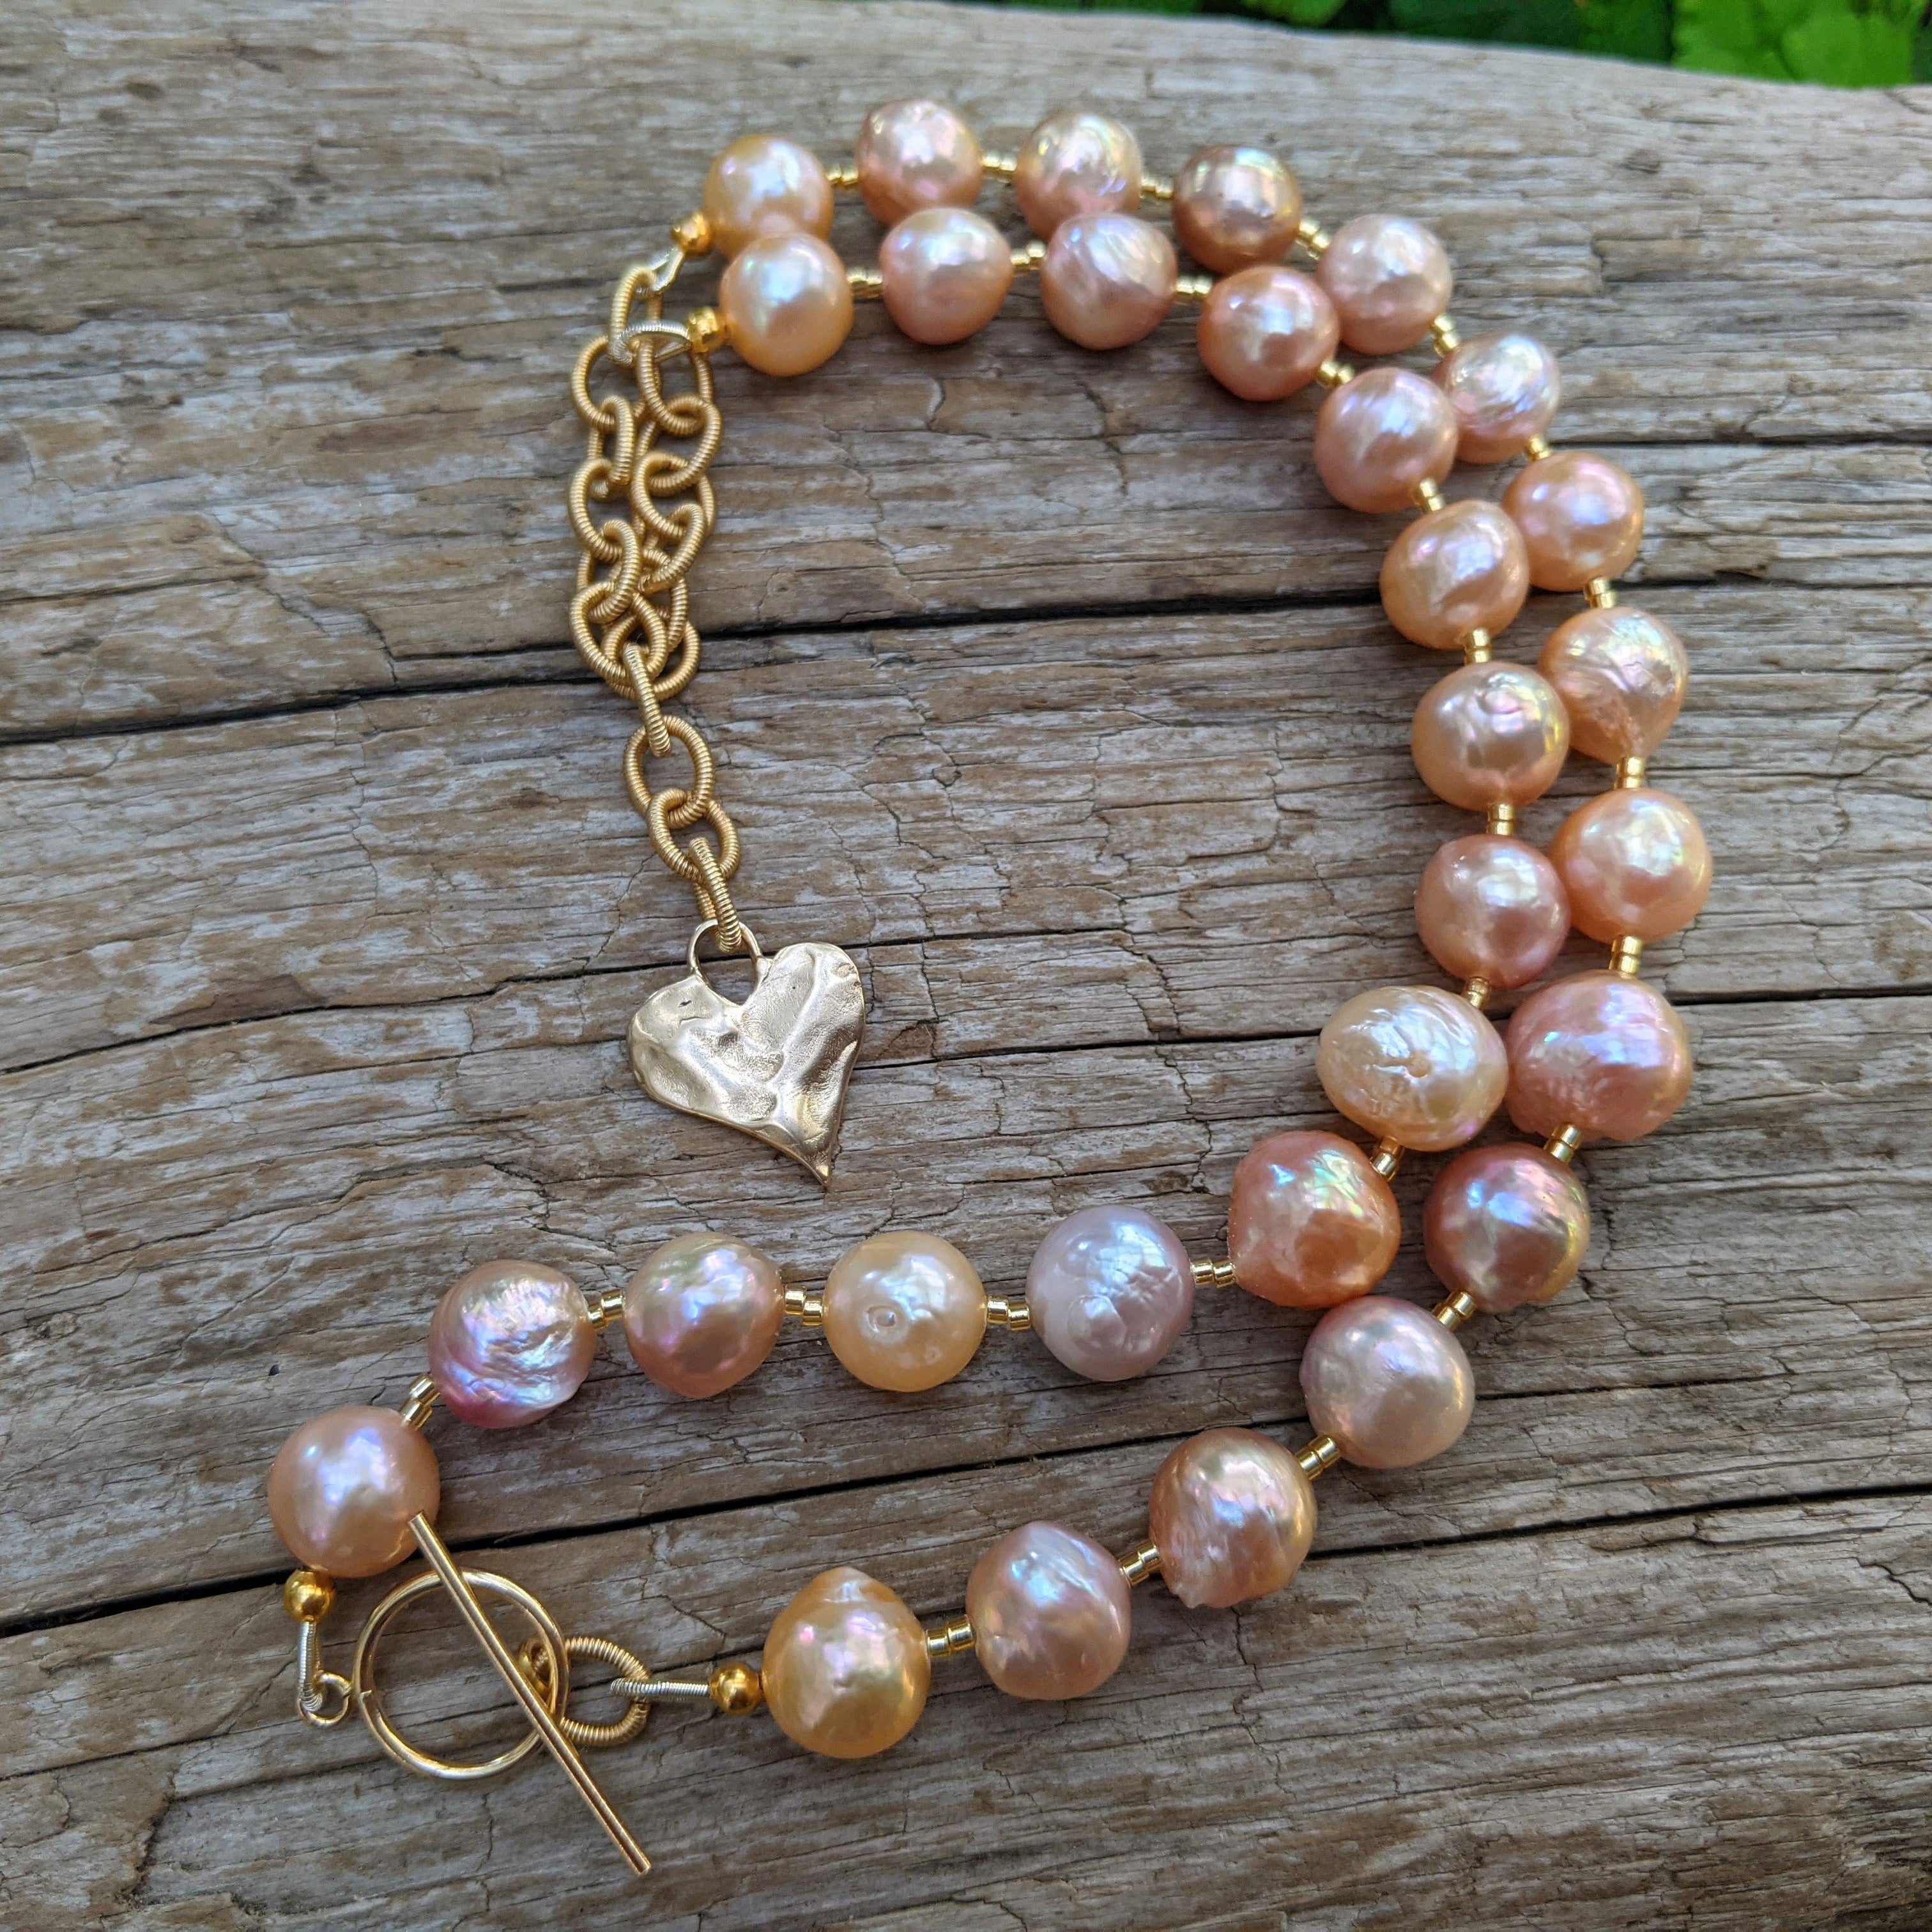 Big pearl necklace. Elegant pearl necklace. Classic Pearl necklace. Handcrafted by Aurora Creative Jewellery.